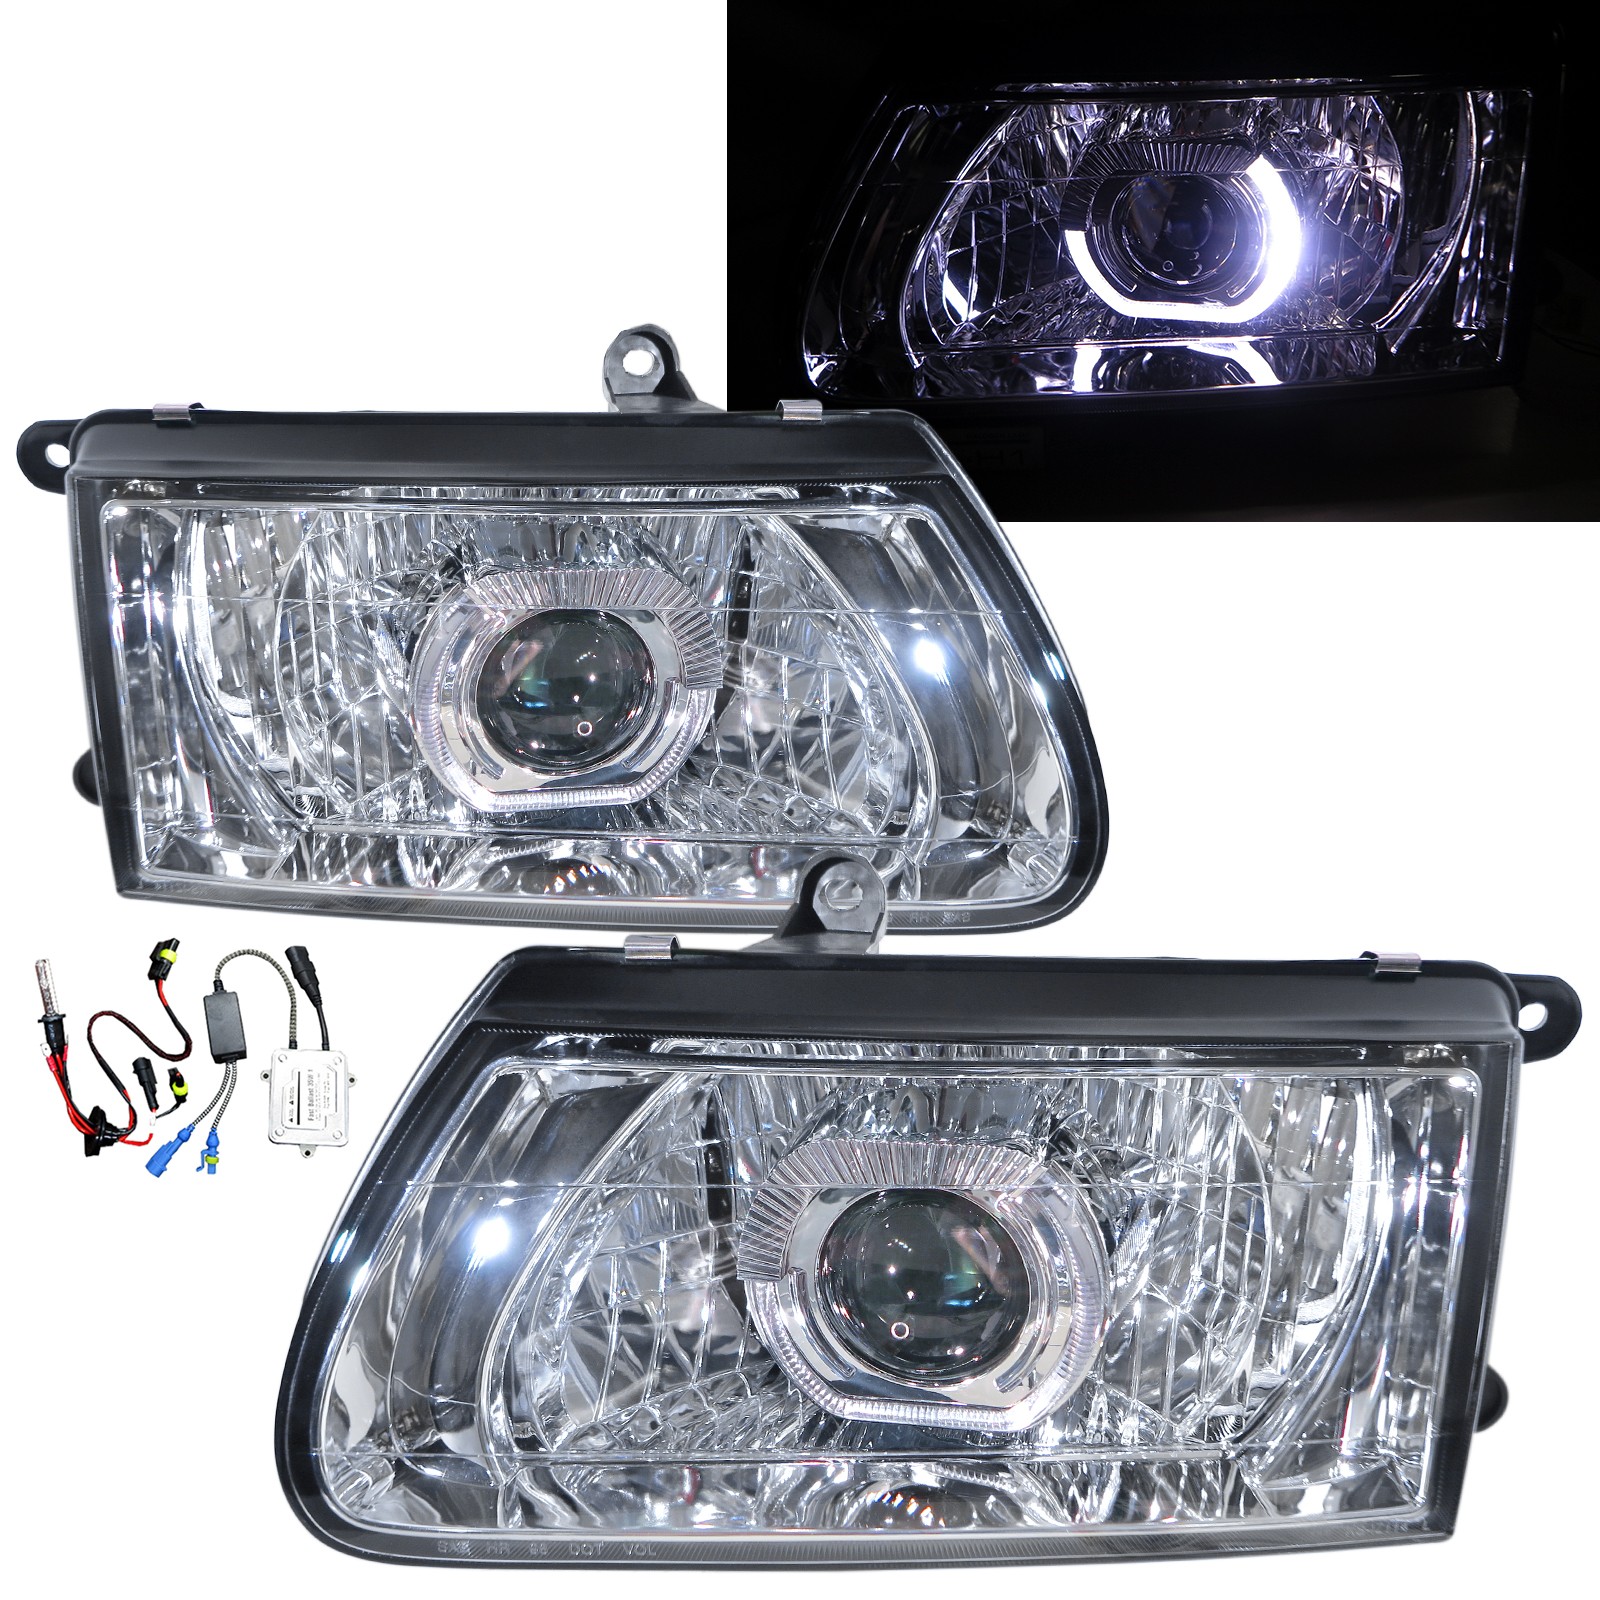 CrazyTheGod Rodeo Second generation 2000-2002 Facelift SUV 3D/5D Guide LED Angel-Eye Projector HID Headlight Headlamp Chrome for ISUZU LHD